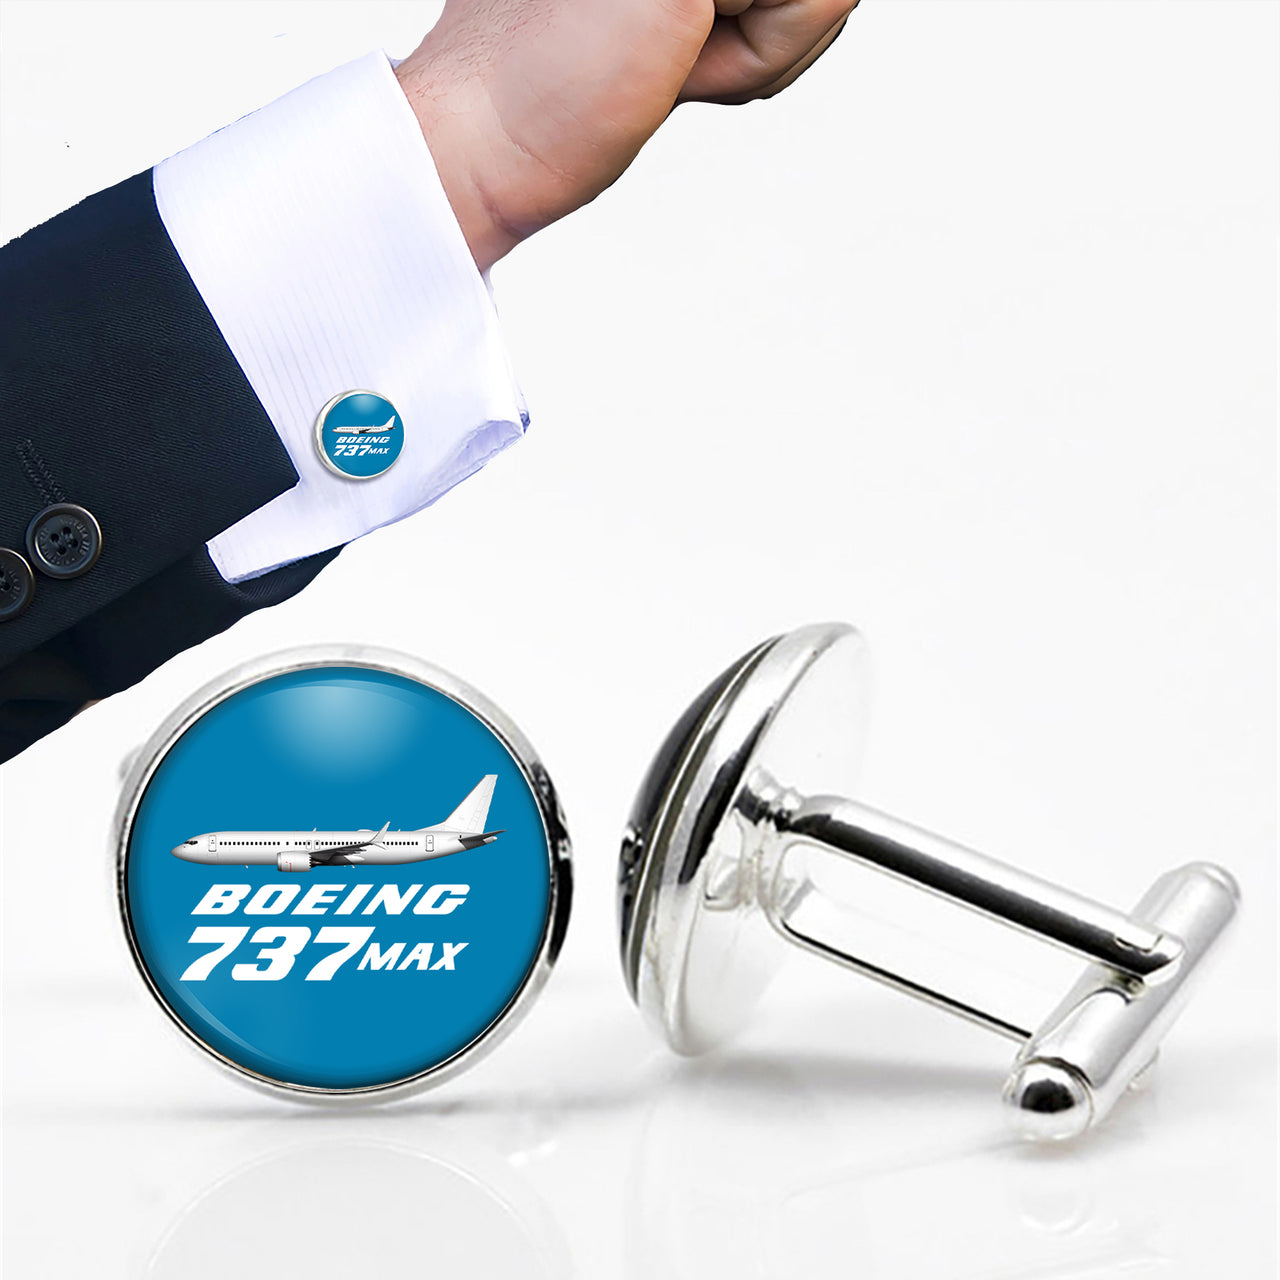 The Boeing 737Max Designed Cuff Links